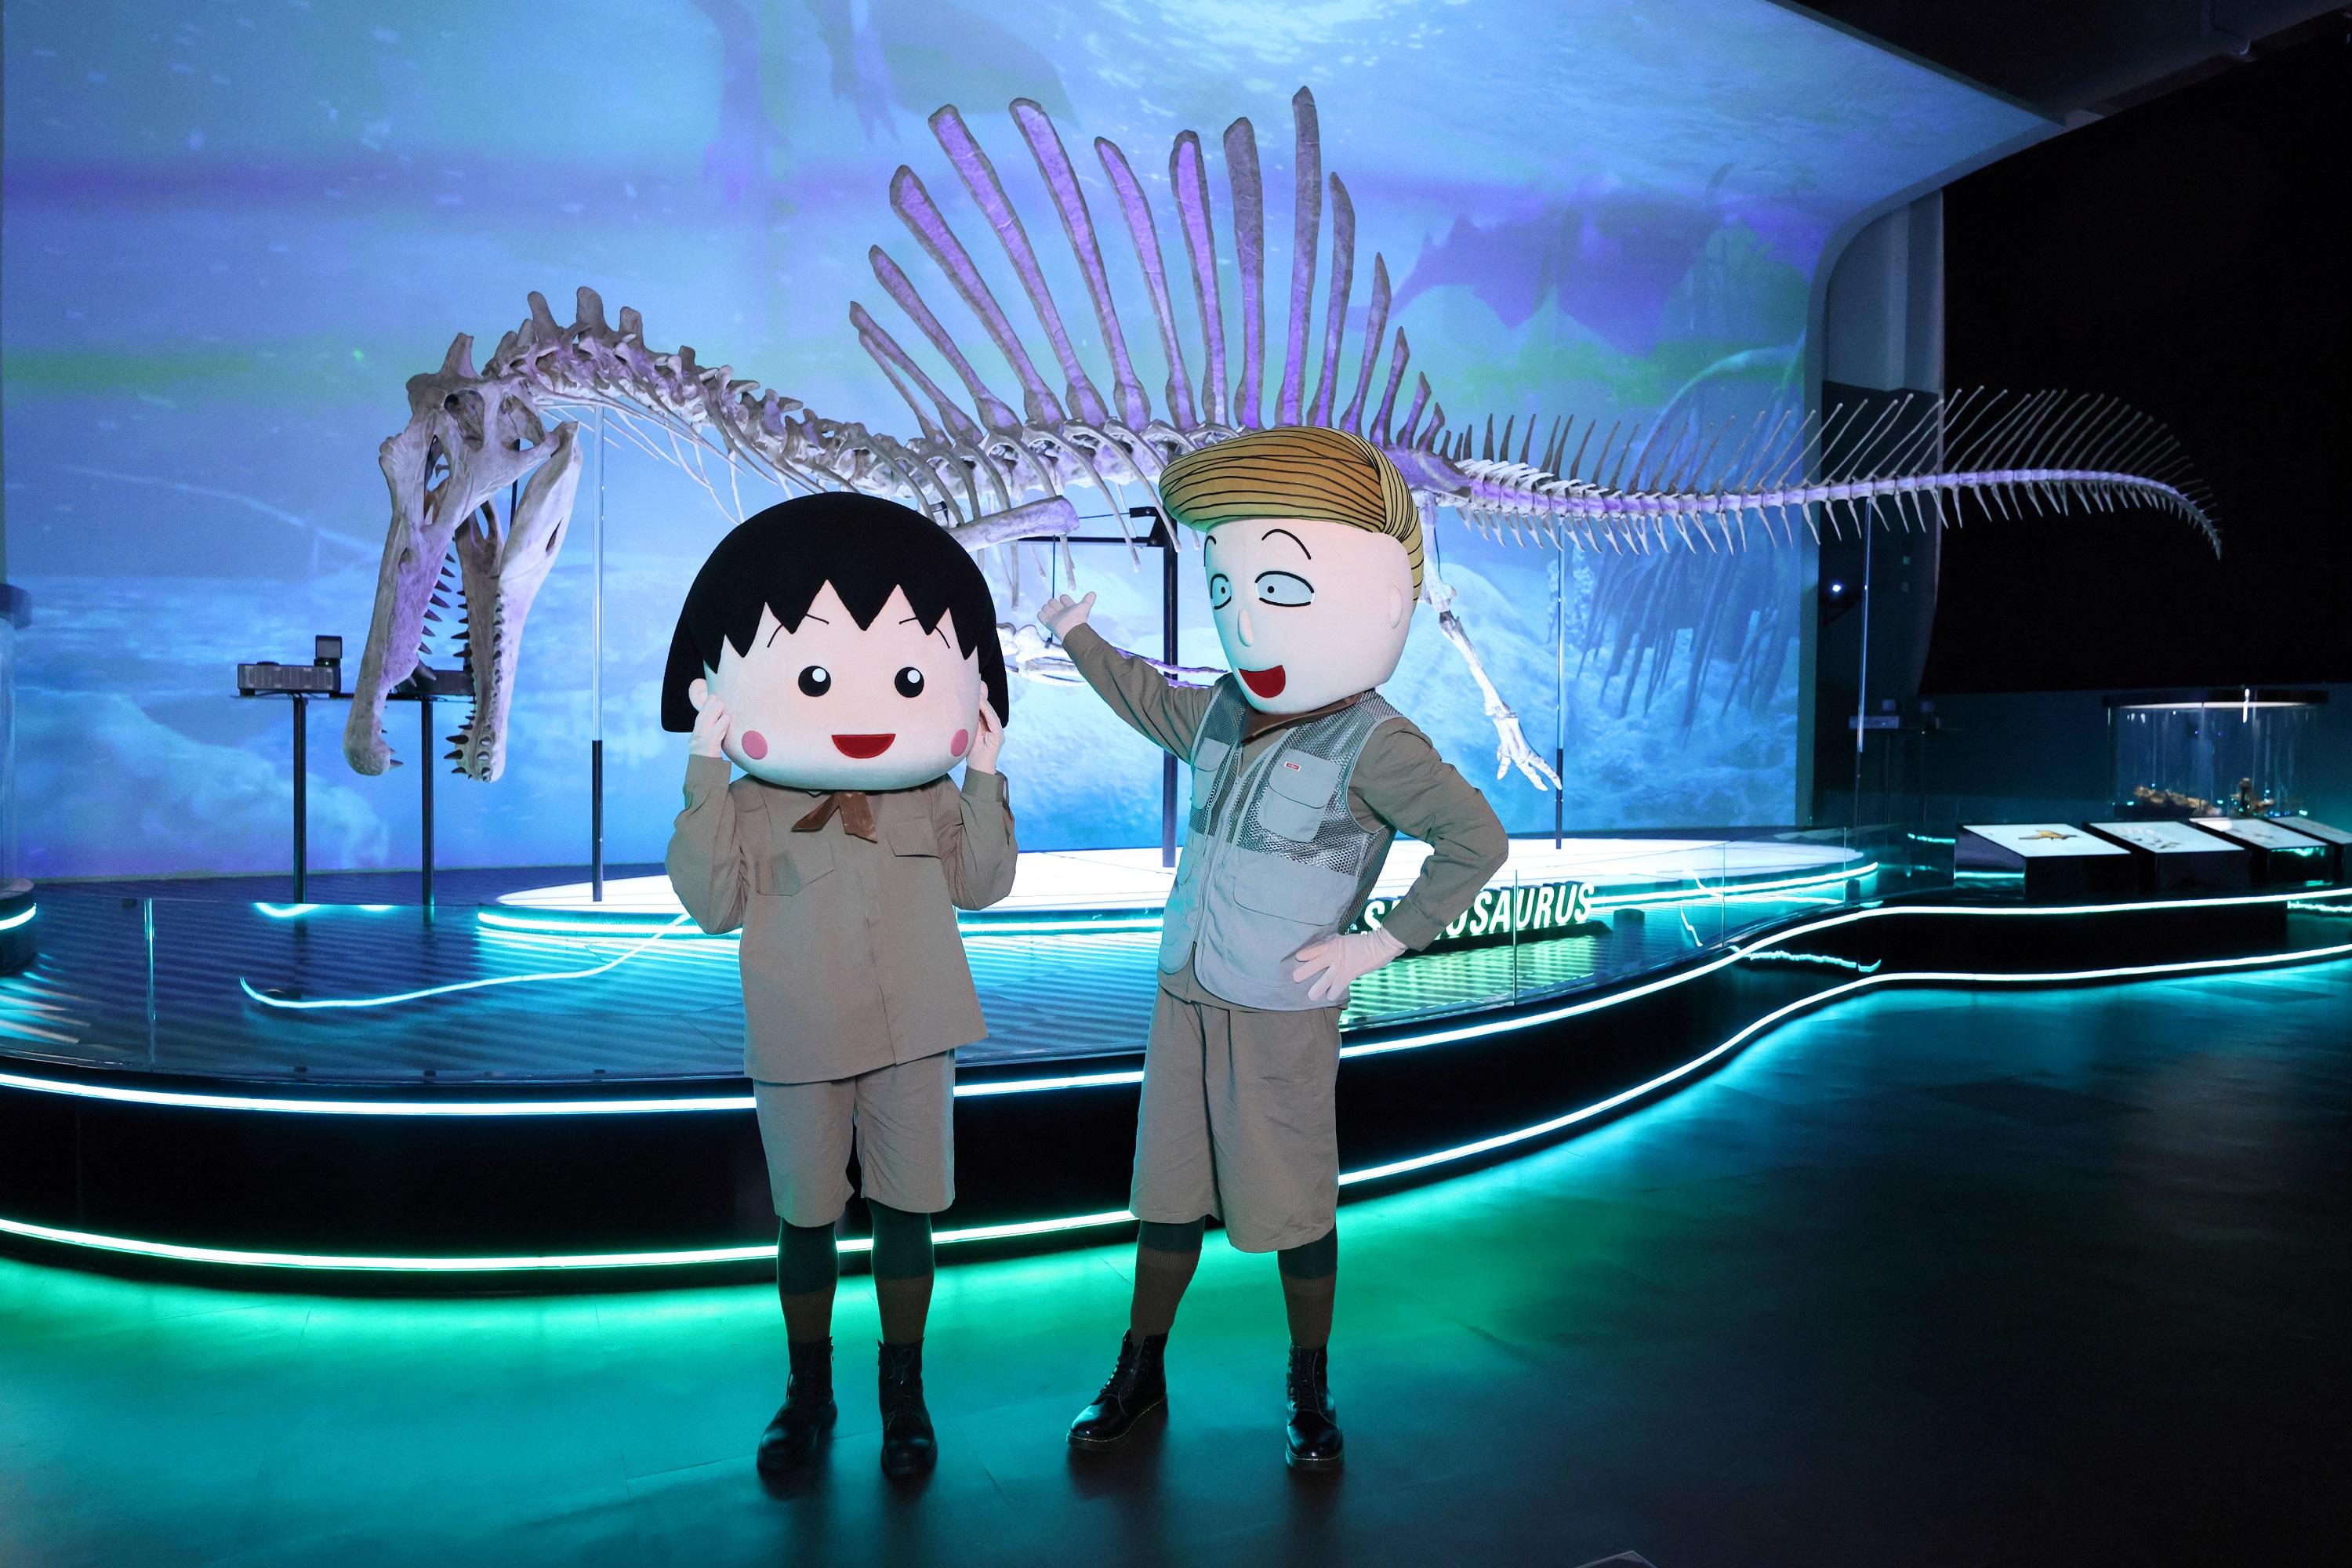 "The Hong Kong Jockey Club Series: The Big Eight - Dinosaur Revelation" exhibition being held at the Hong Kong Science Museum will end on February 22 (Wednesday). Members of the public should grasp the final opportunity to visit this not-to-be-missed exhibition. Picture shows Chibi Maruko Chan and Hanawa Kun, the Expedition Leaders for the Safari Tour.